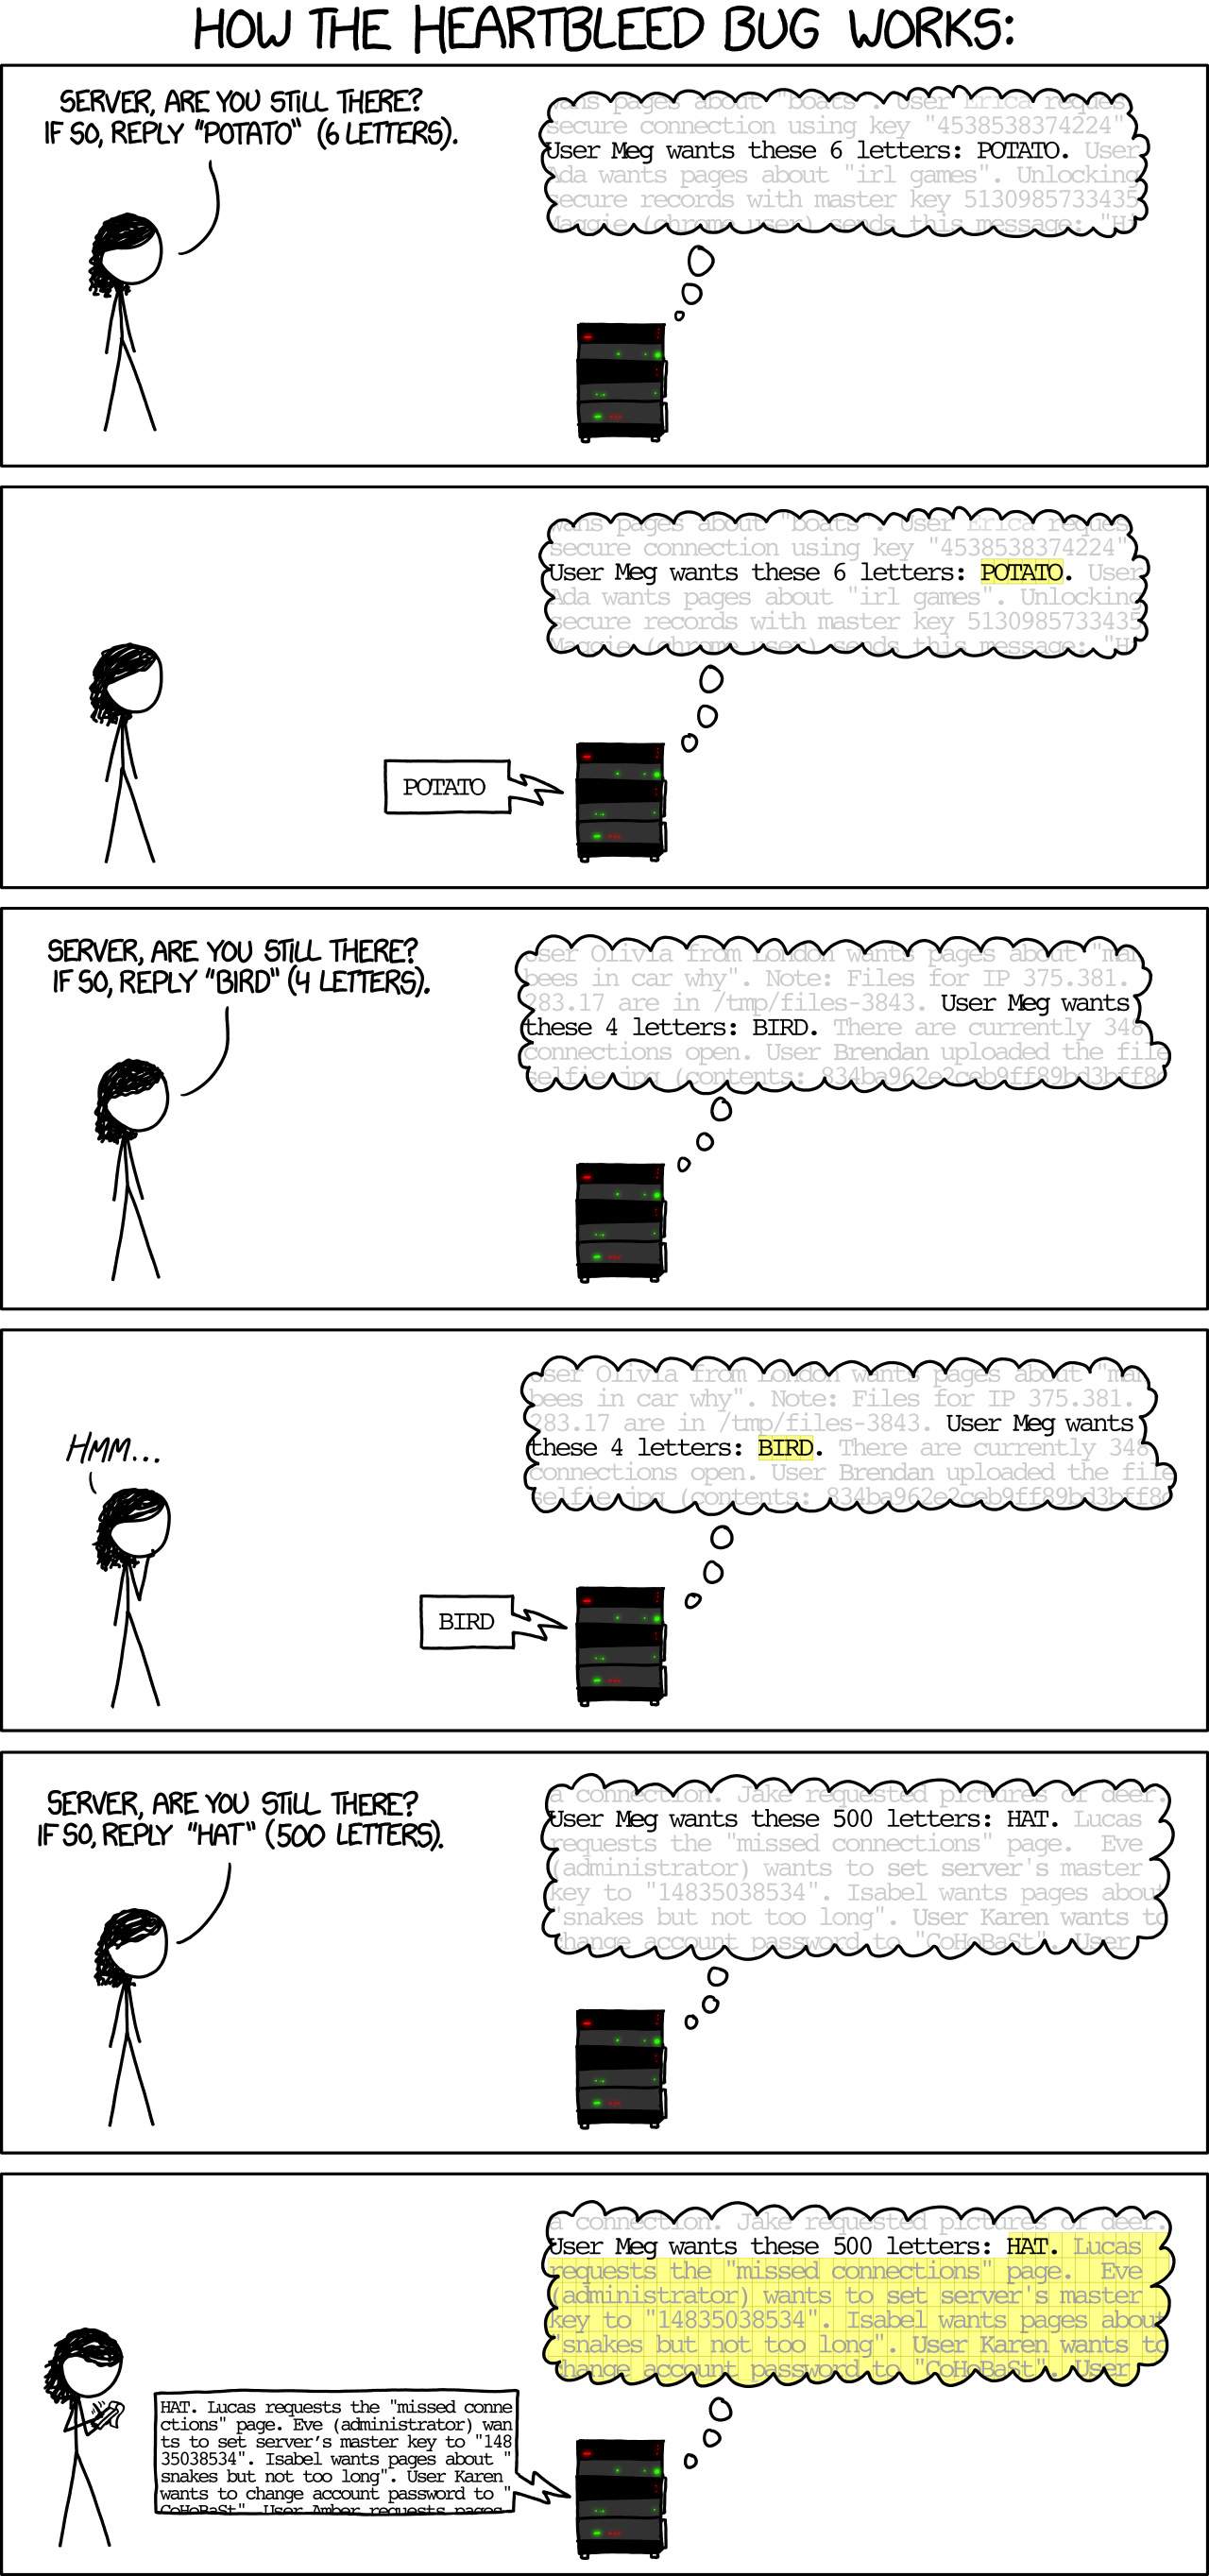 2407: Depth and Breadth - explain xkcd